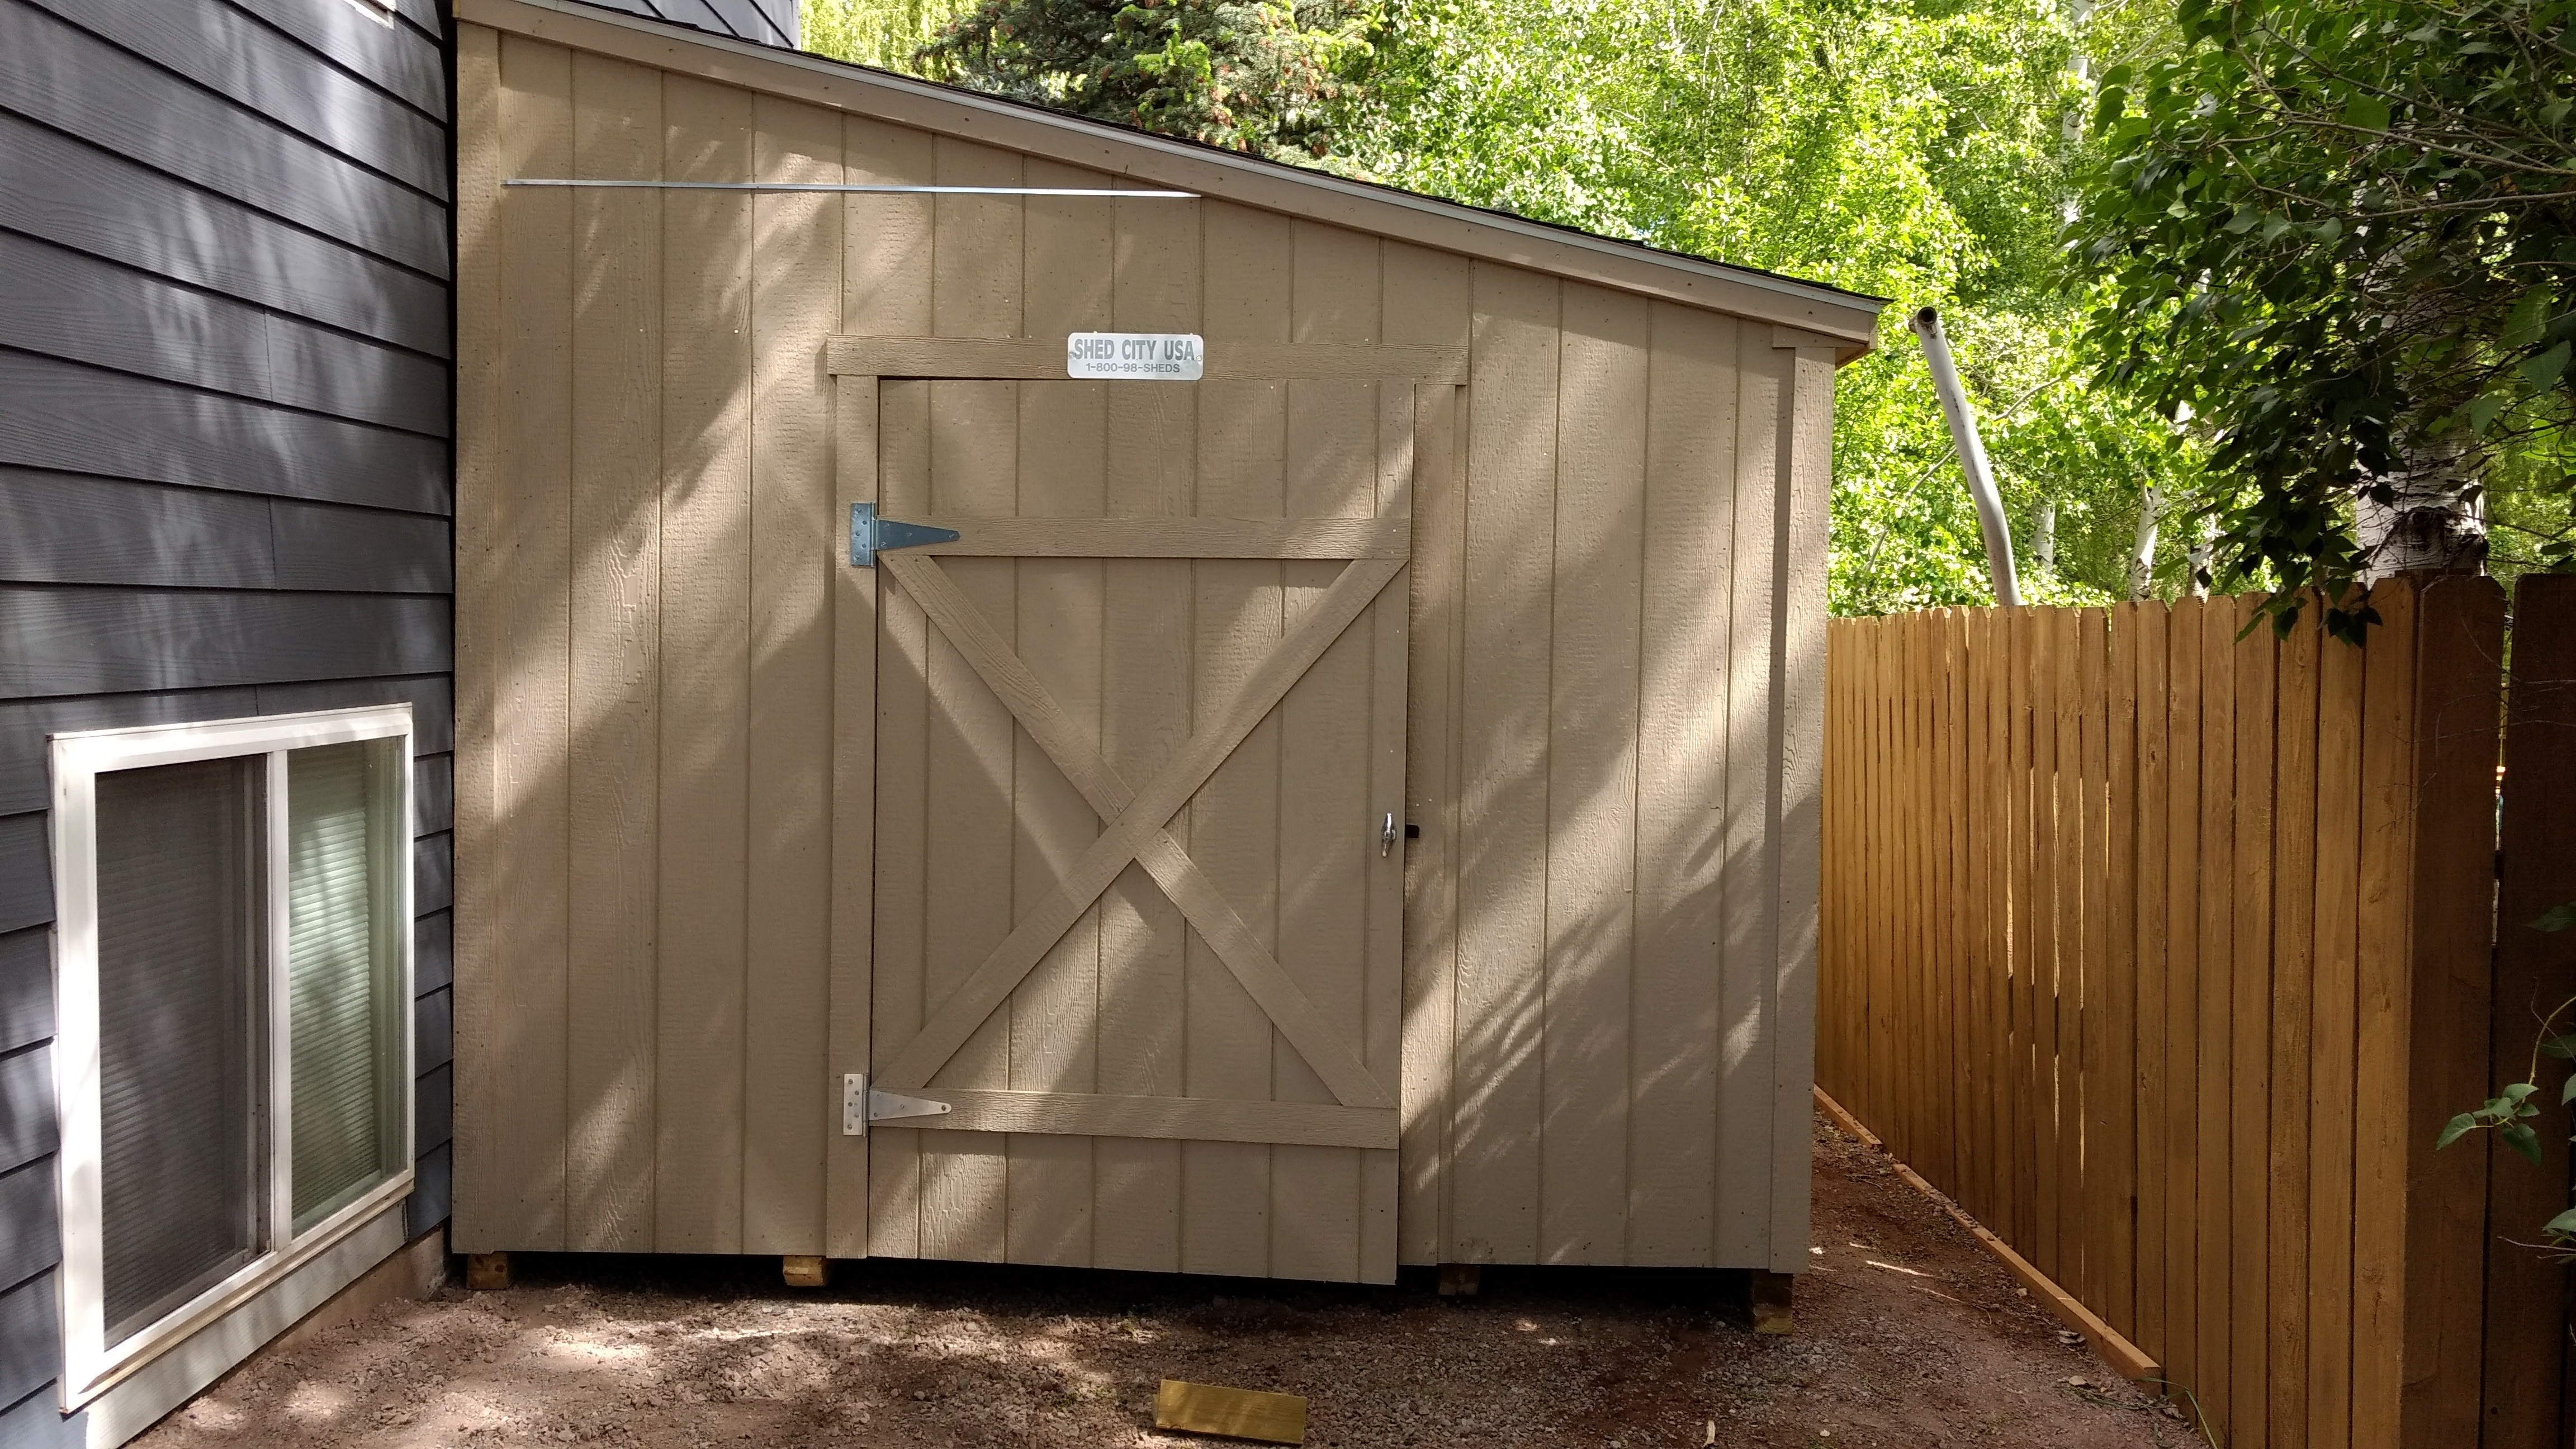 Lean-To Style Wood Storage Sheds - Shed City USA - Shed